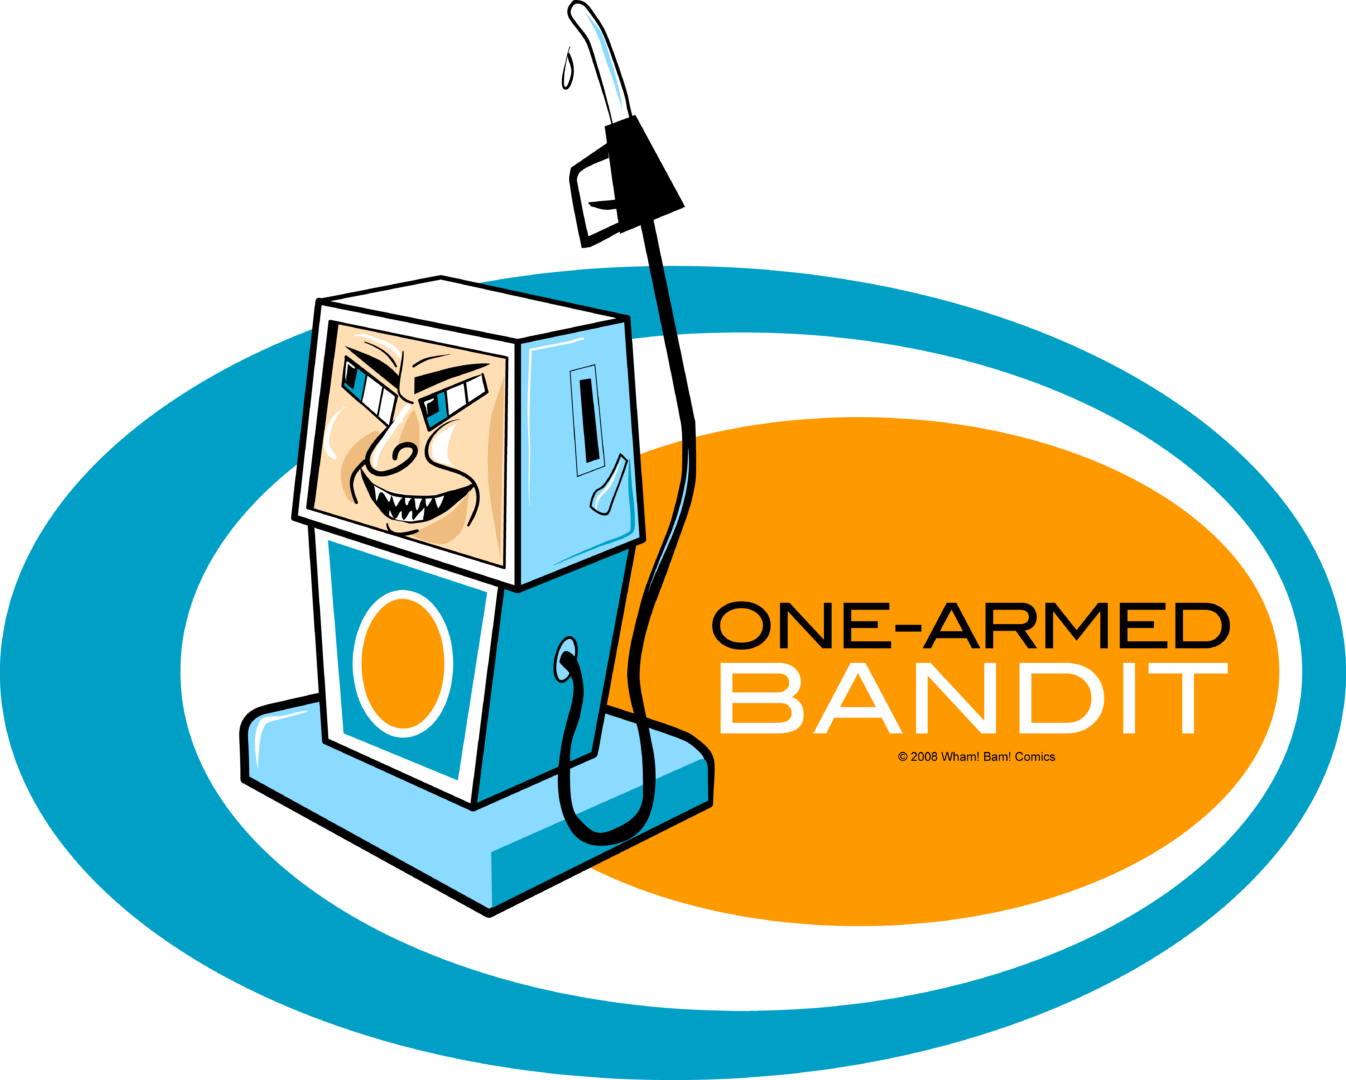 One-Armed Bandit